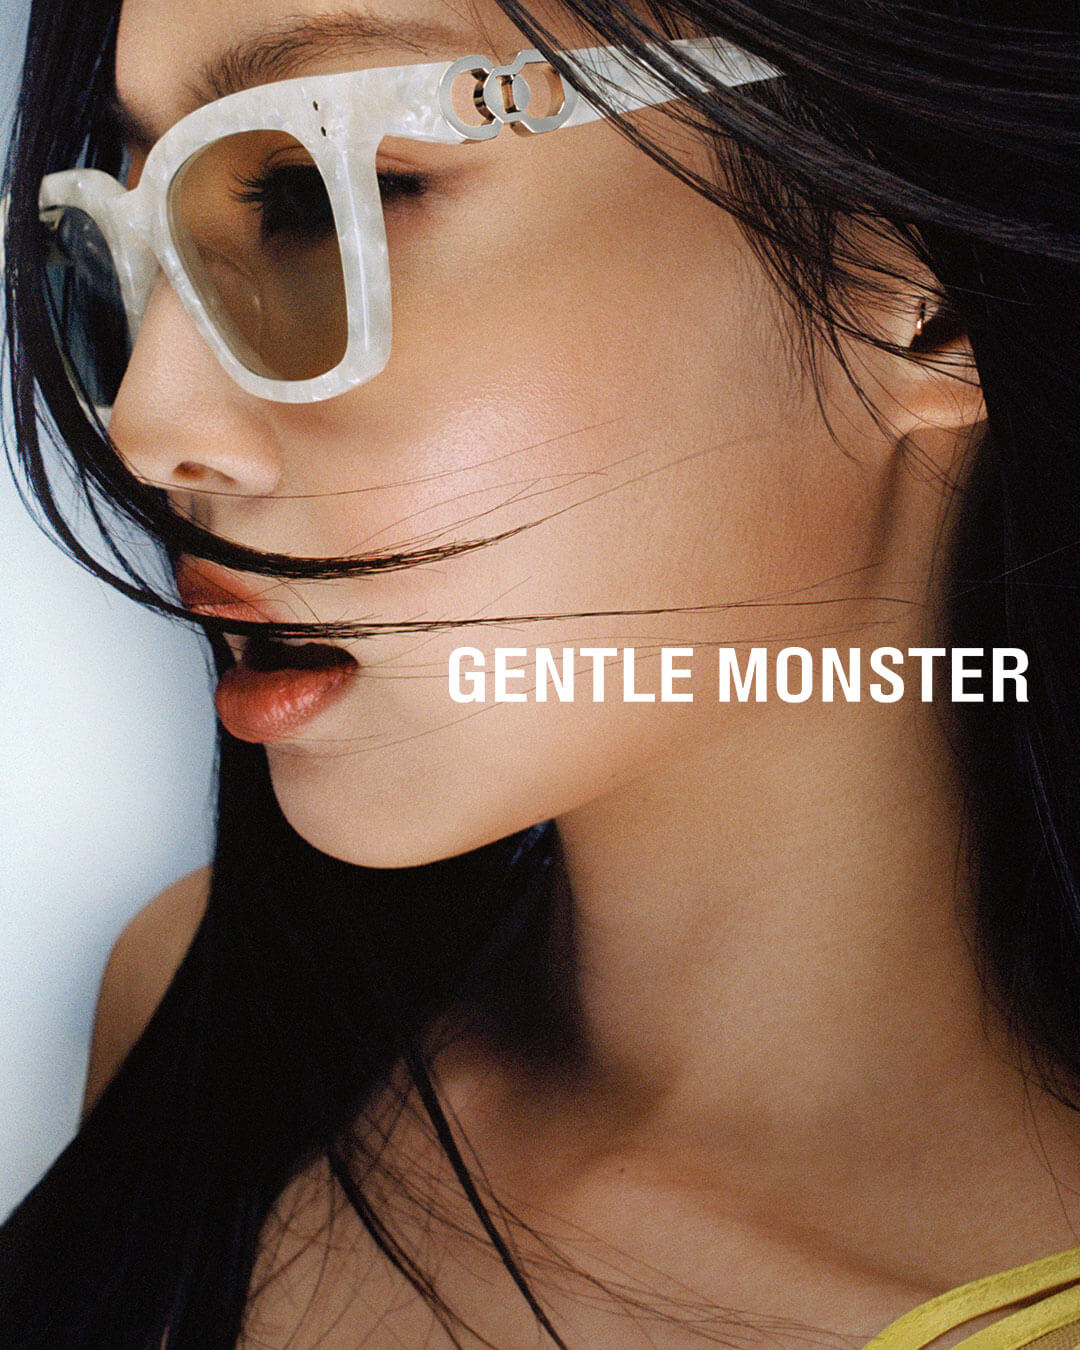 Blackpink’s Jennie x Gentle Monster Return With Another Hit Collection